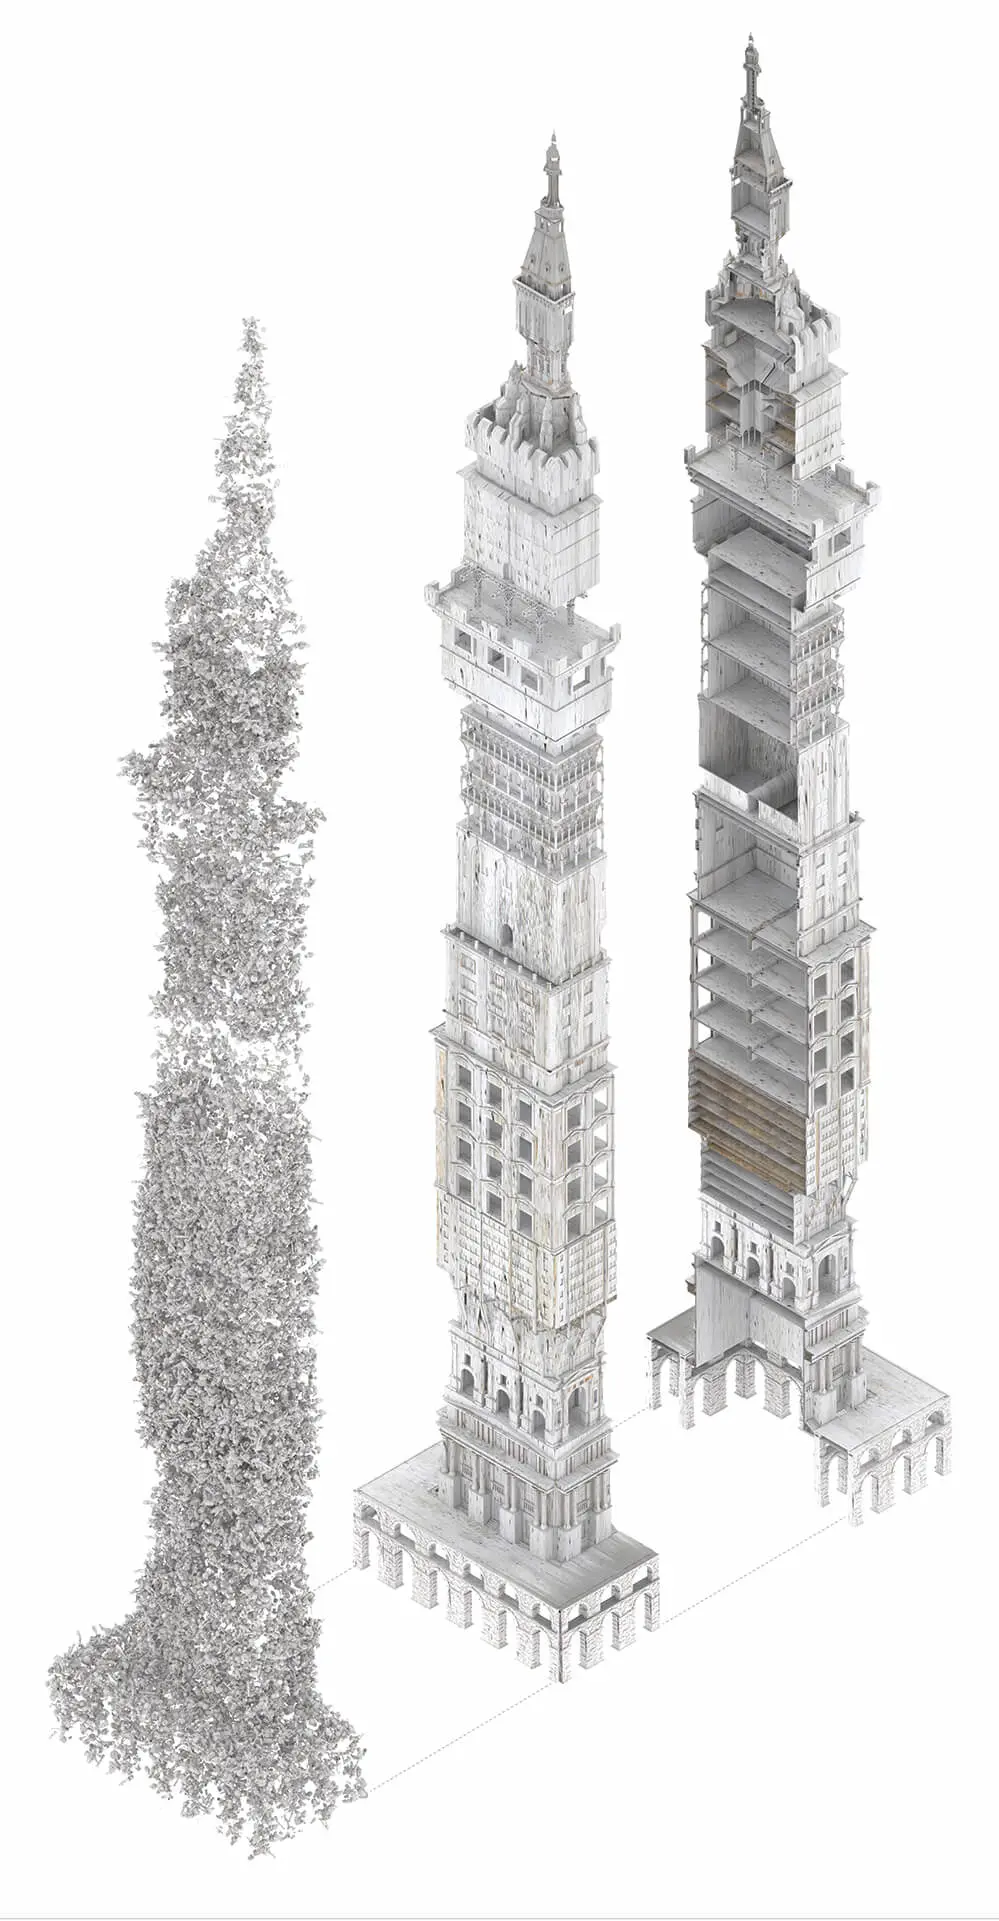 Skyhive architecture competition winners 2019- Tower Layers small